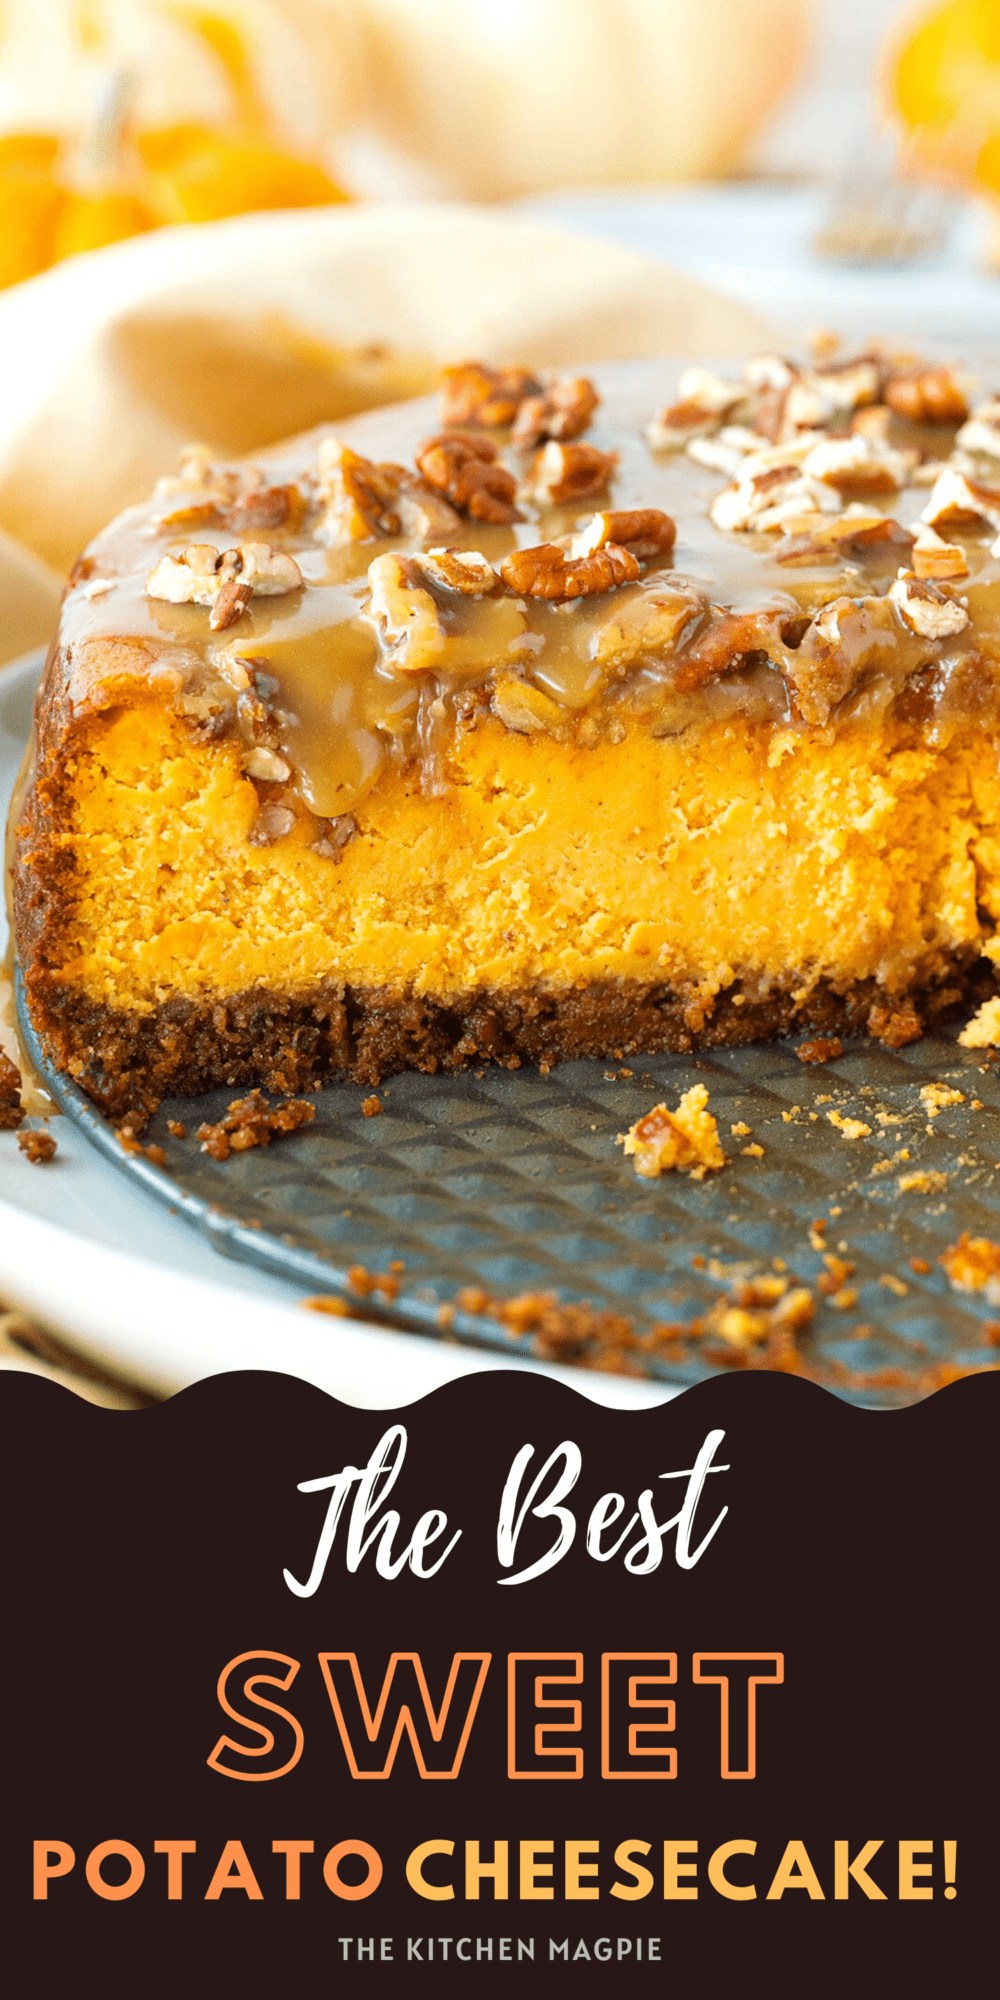 A cinnamon graham cracker crust is topped with a decadent sweet potato cheesecake, a delicious twist to your holiday favorites!